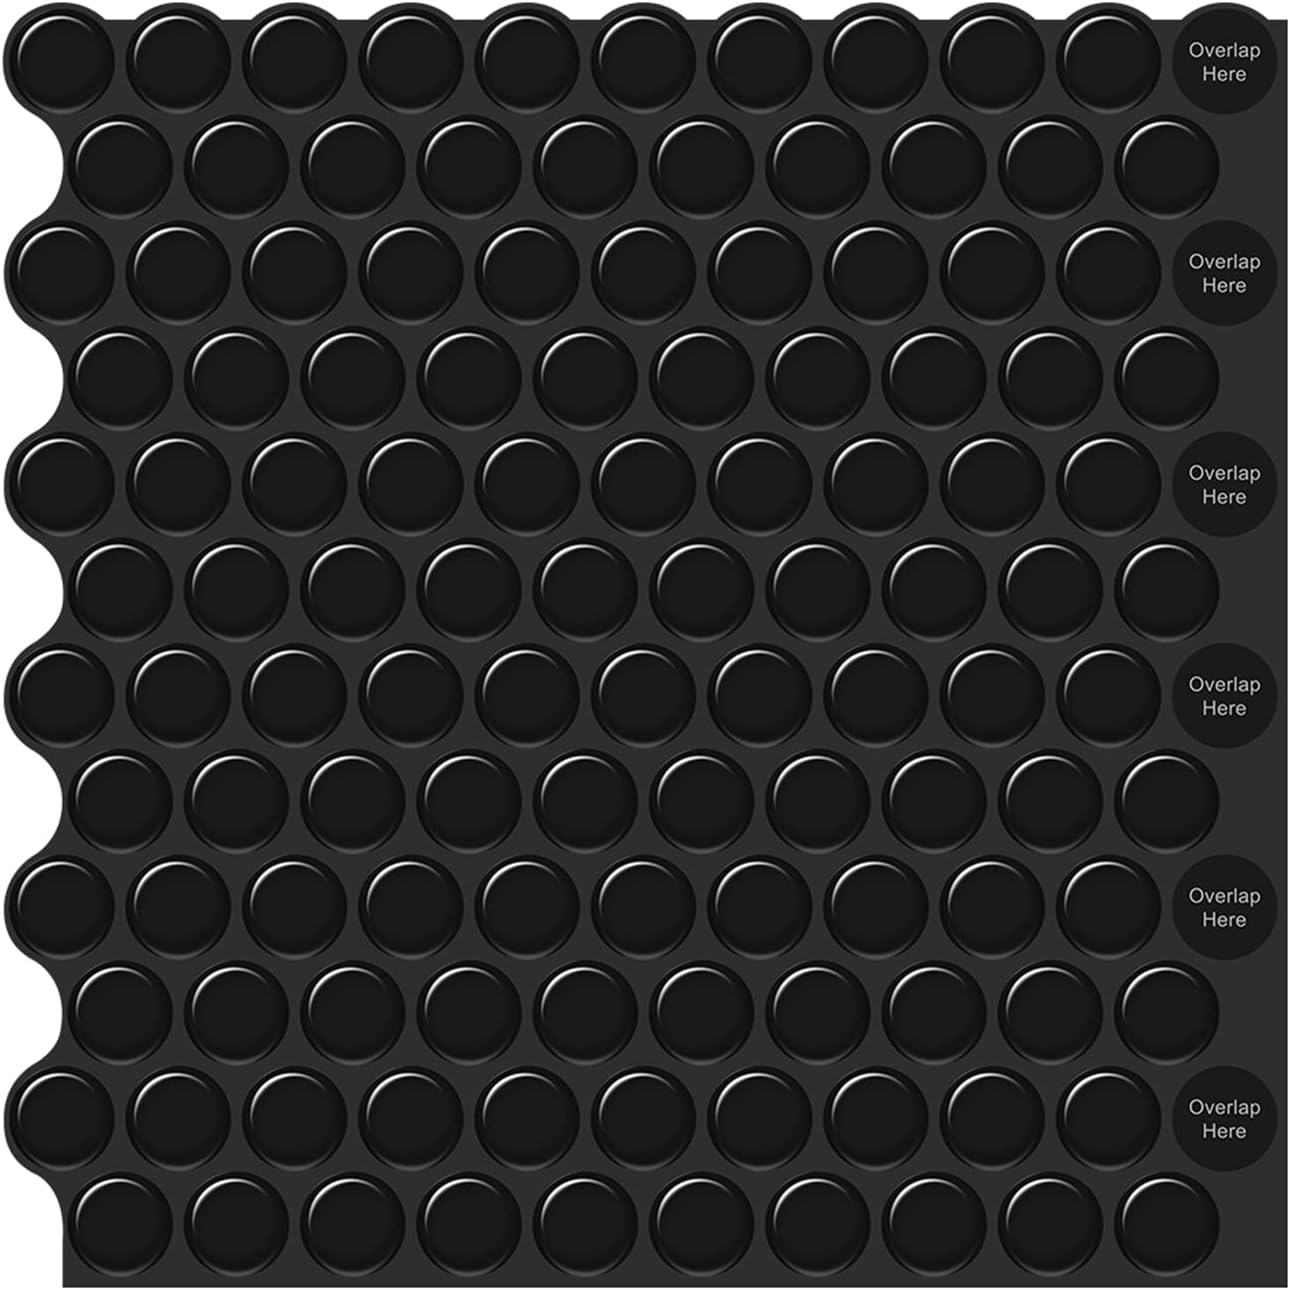 ATCOOGUS Peel and Stick Backsplash,Penny Round 3D Self Adhesive Wall Tiles for Kitchen,Bathroom,RV ect(10''x10'') (Black, 10)